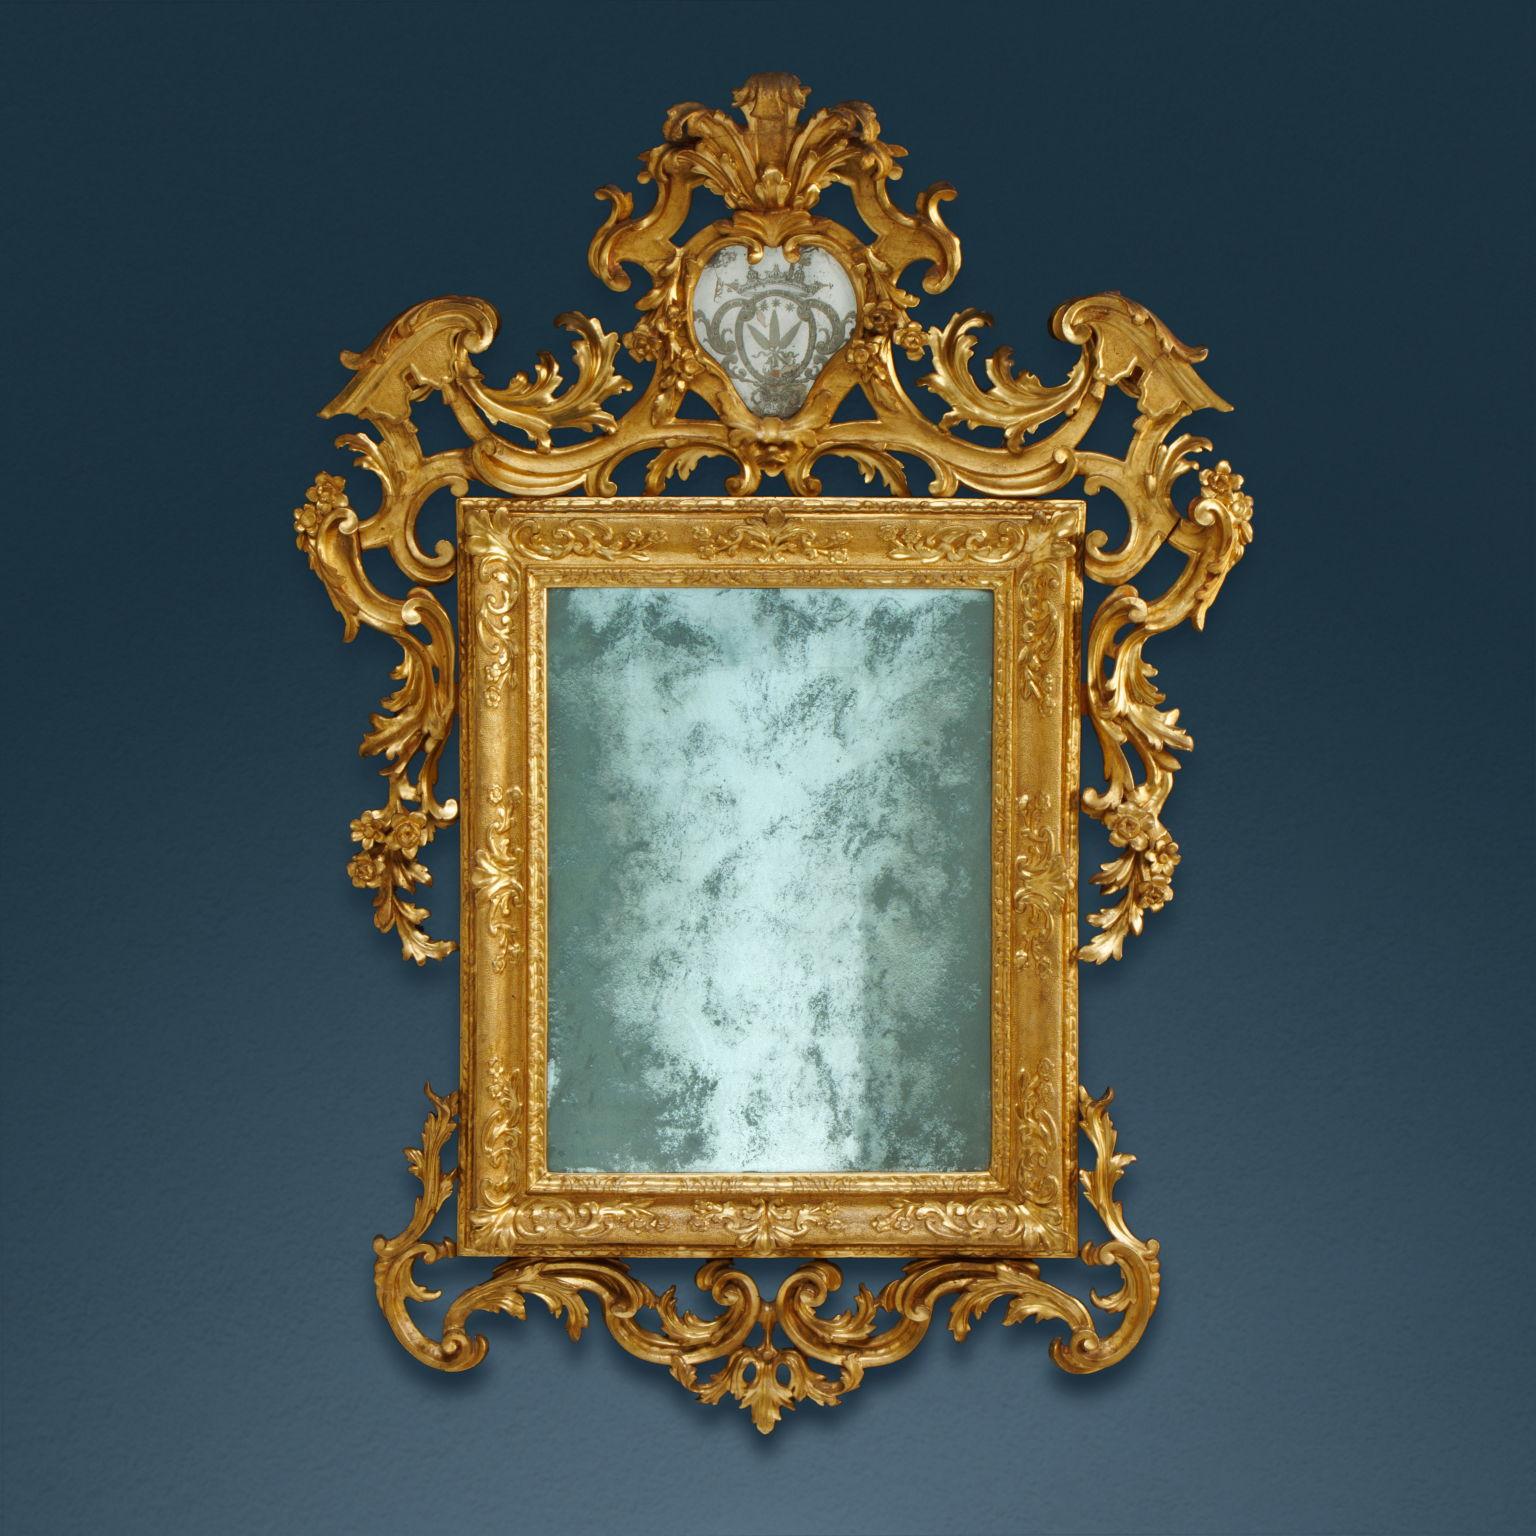 Carved and gilded wooden mirror. The rectangular frame enclosing the mirror is carved with small scroll motifs on the corners with the bottom tapped with a burin. Surrounding the frame is a carved decoration with architectural volutes and foliage